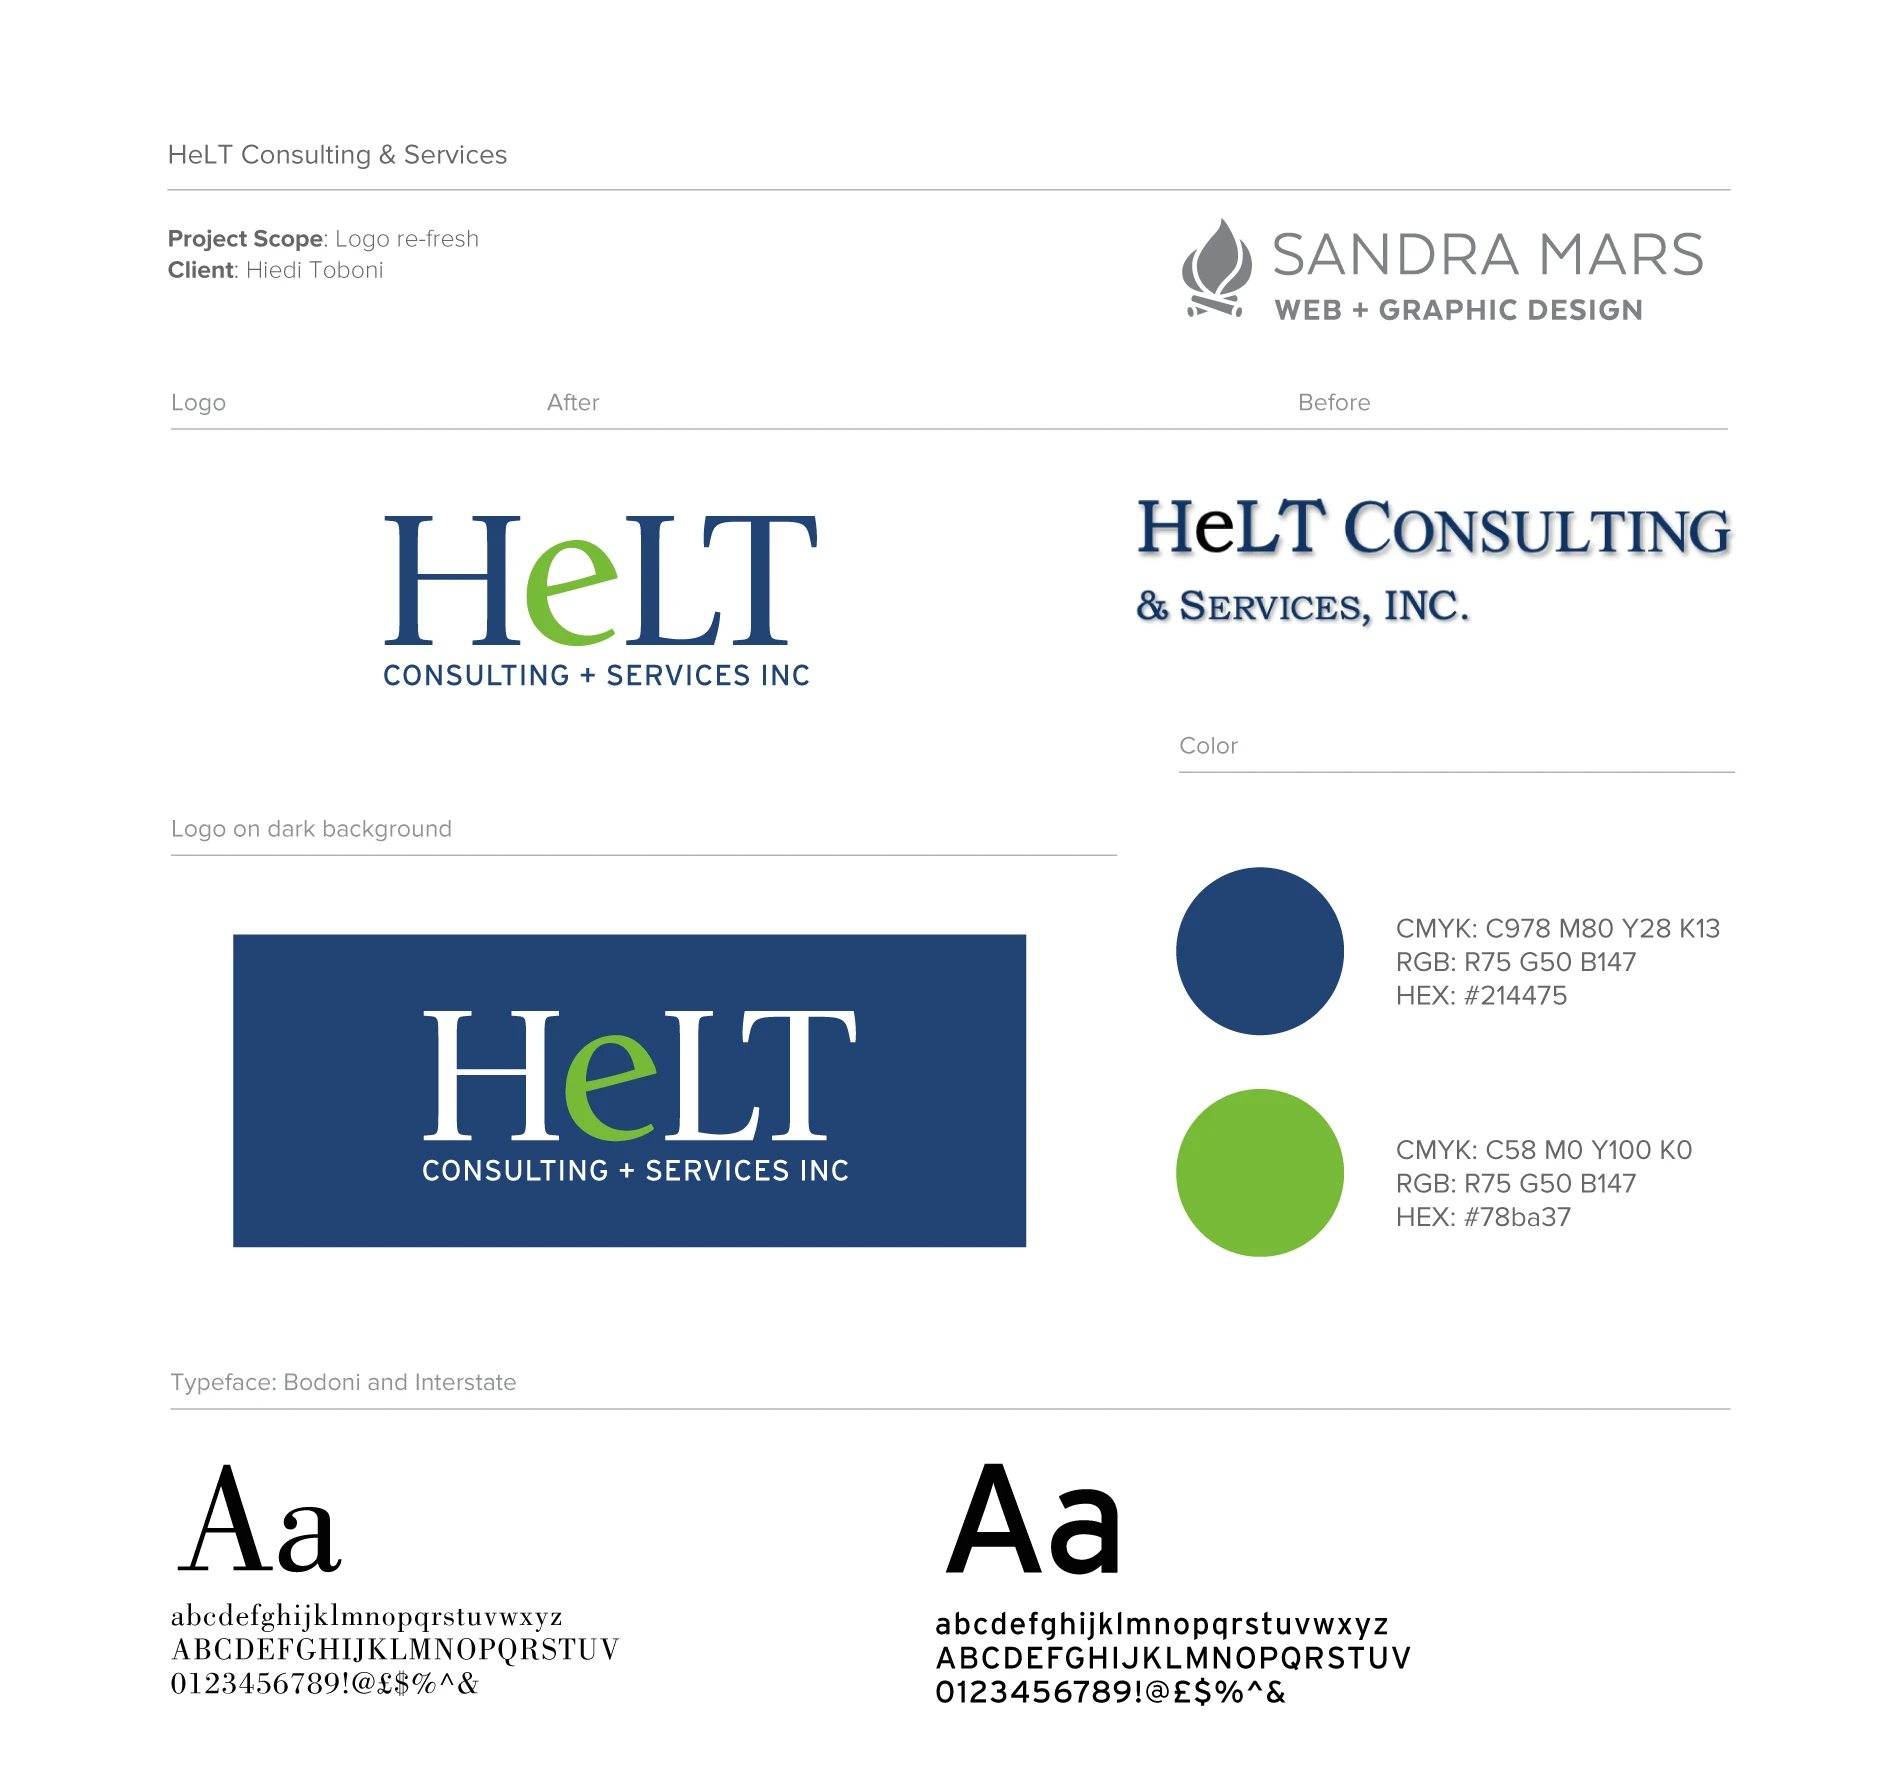 Helt Consulting & Services brand styleguide